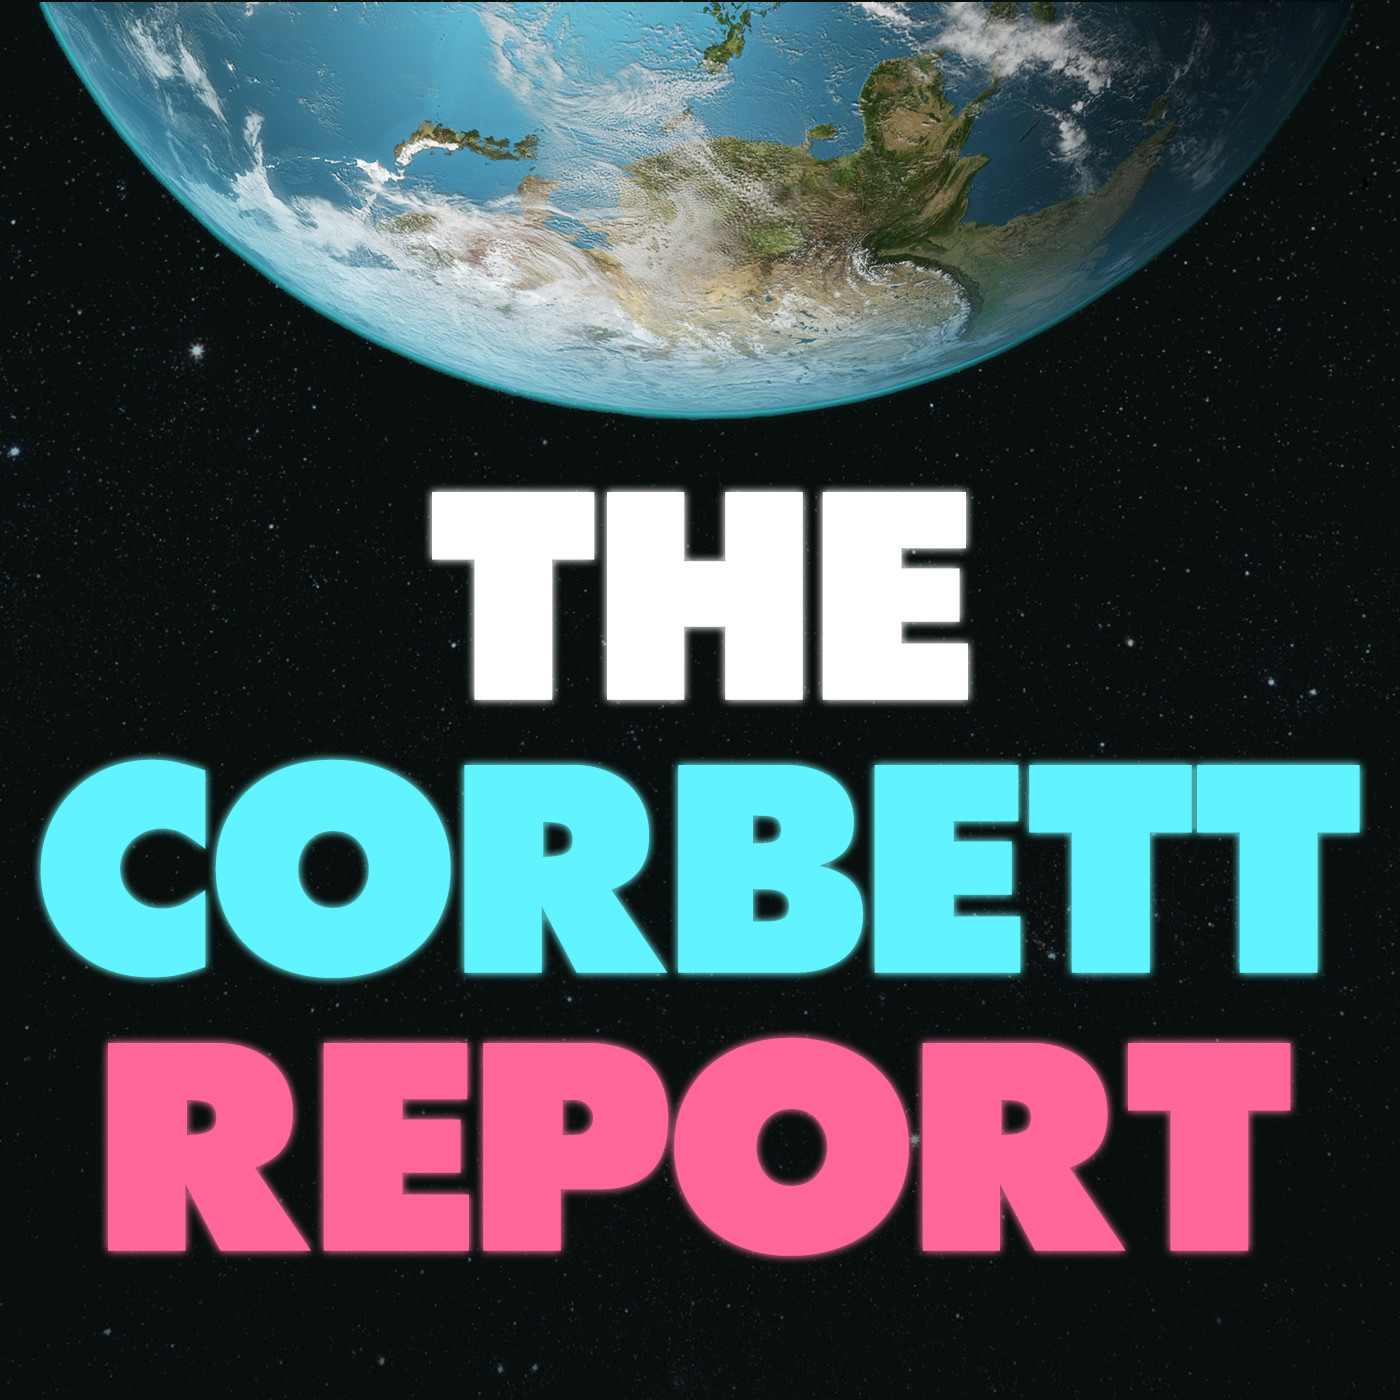 sanctions-are-war-by-other-means-the-corbett-report